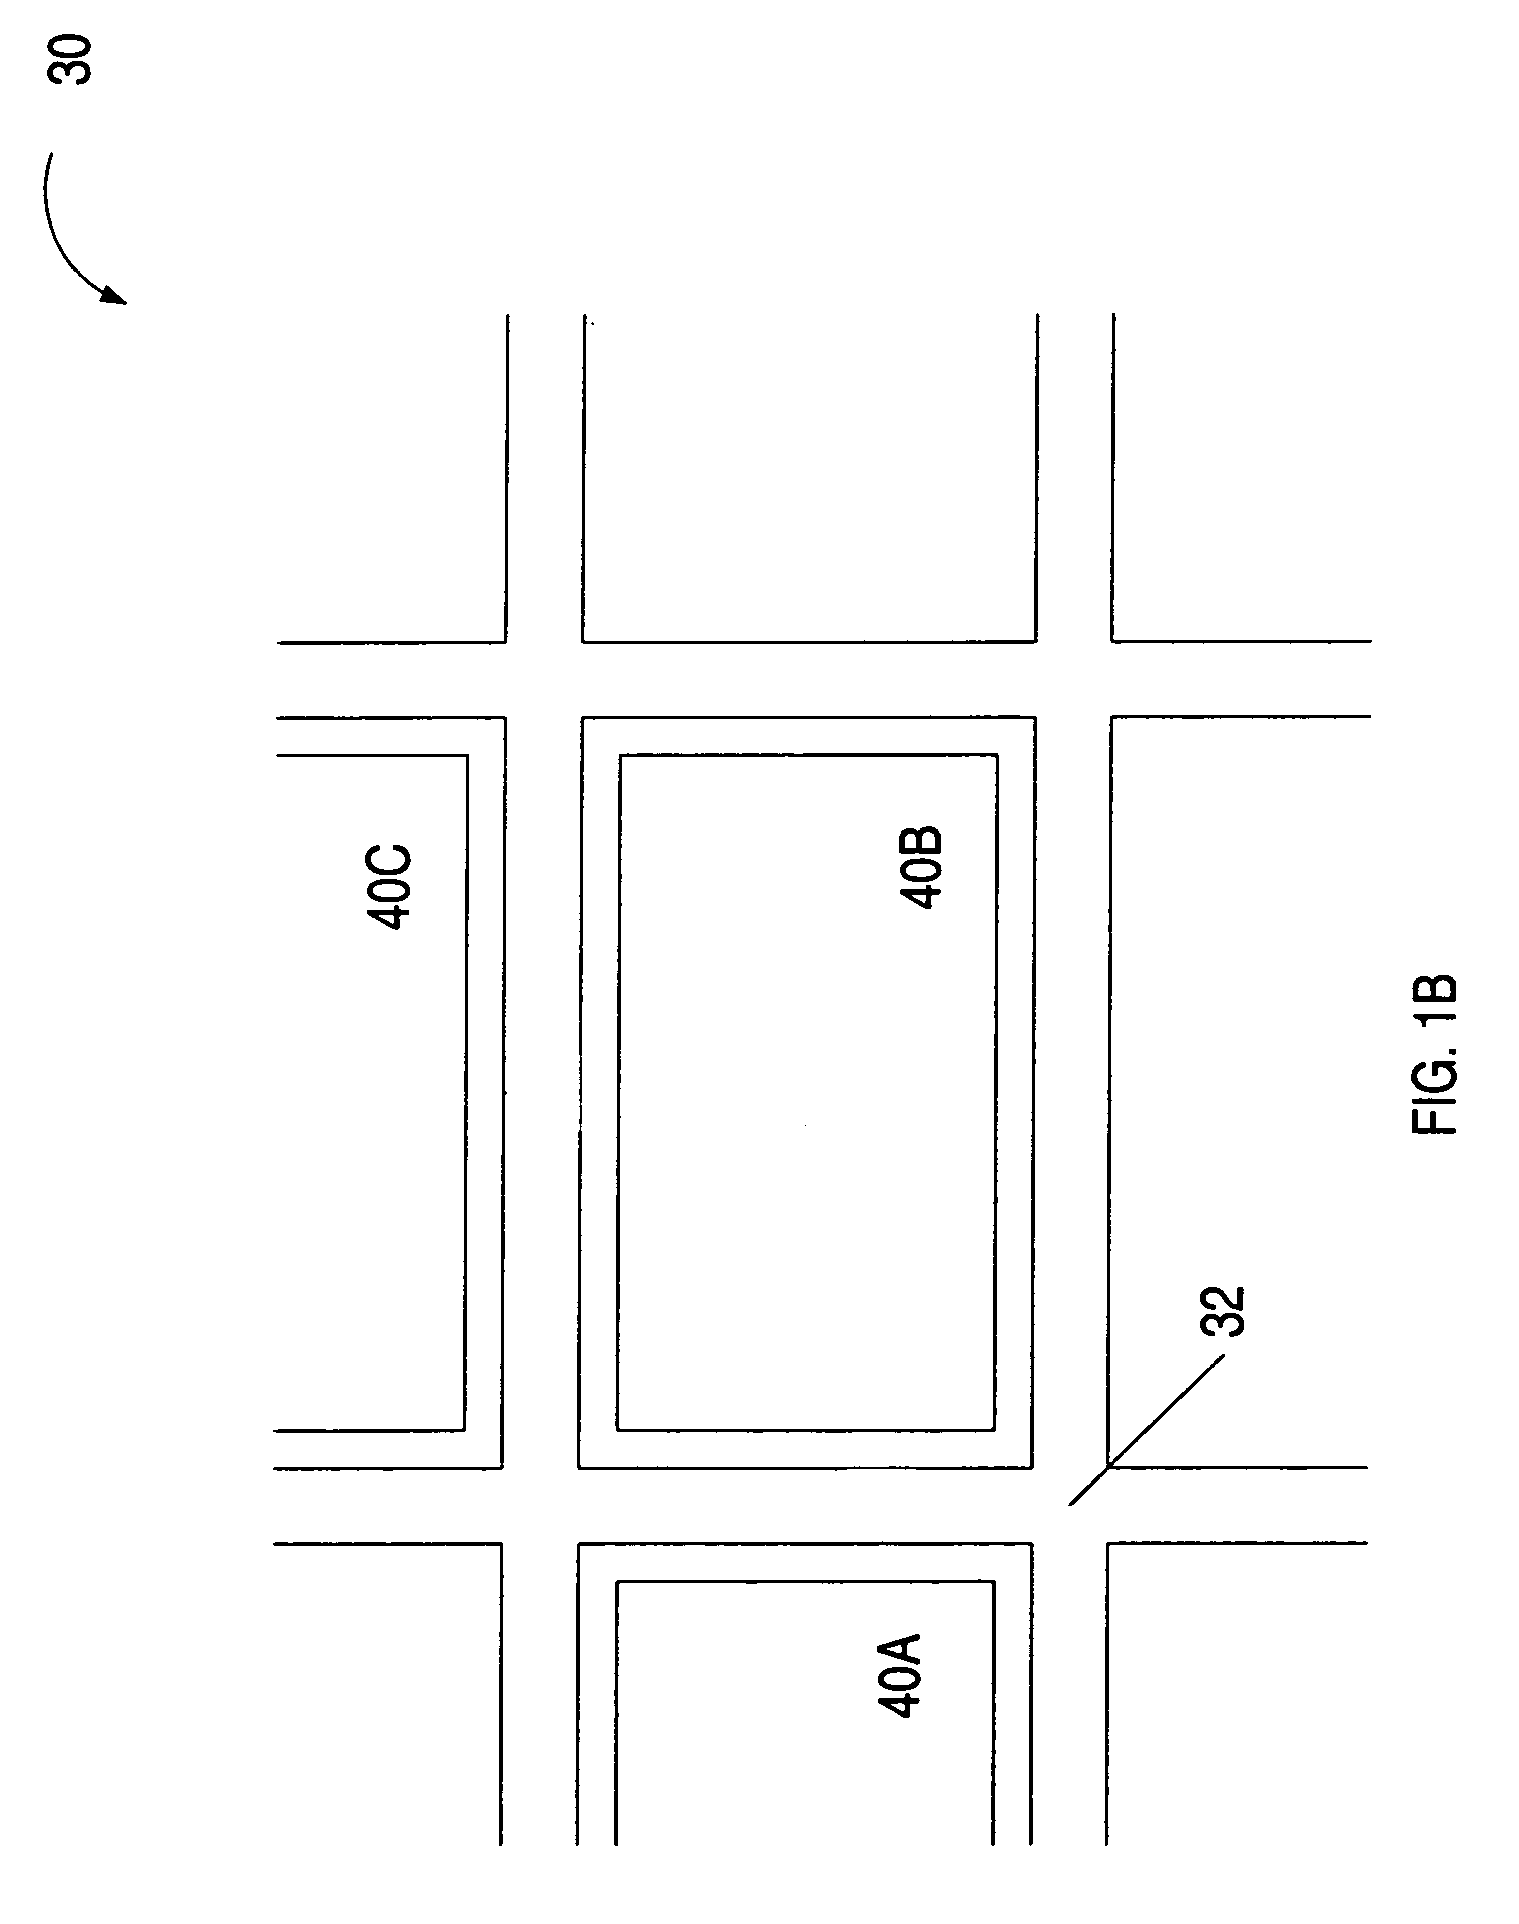 System and method for tracking and routing shipped items